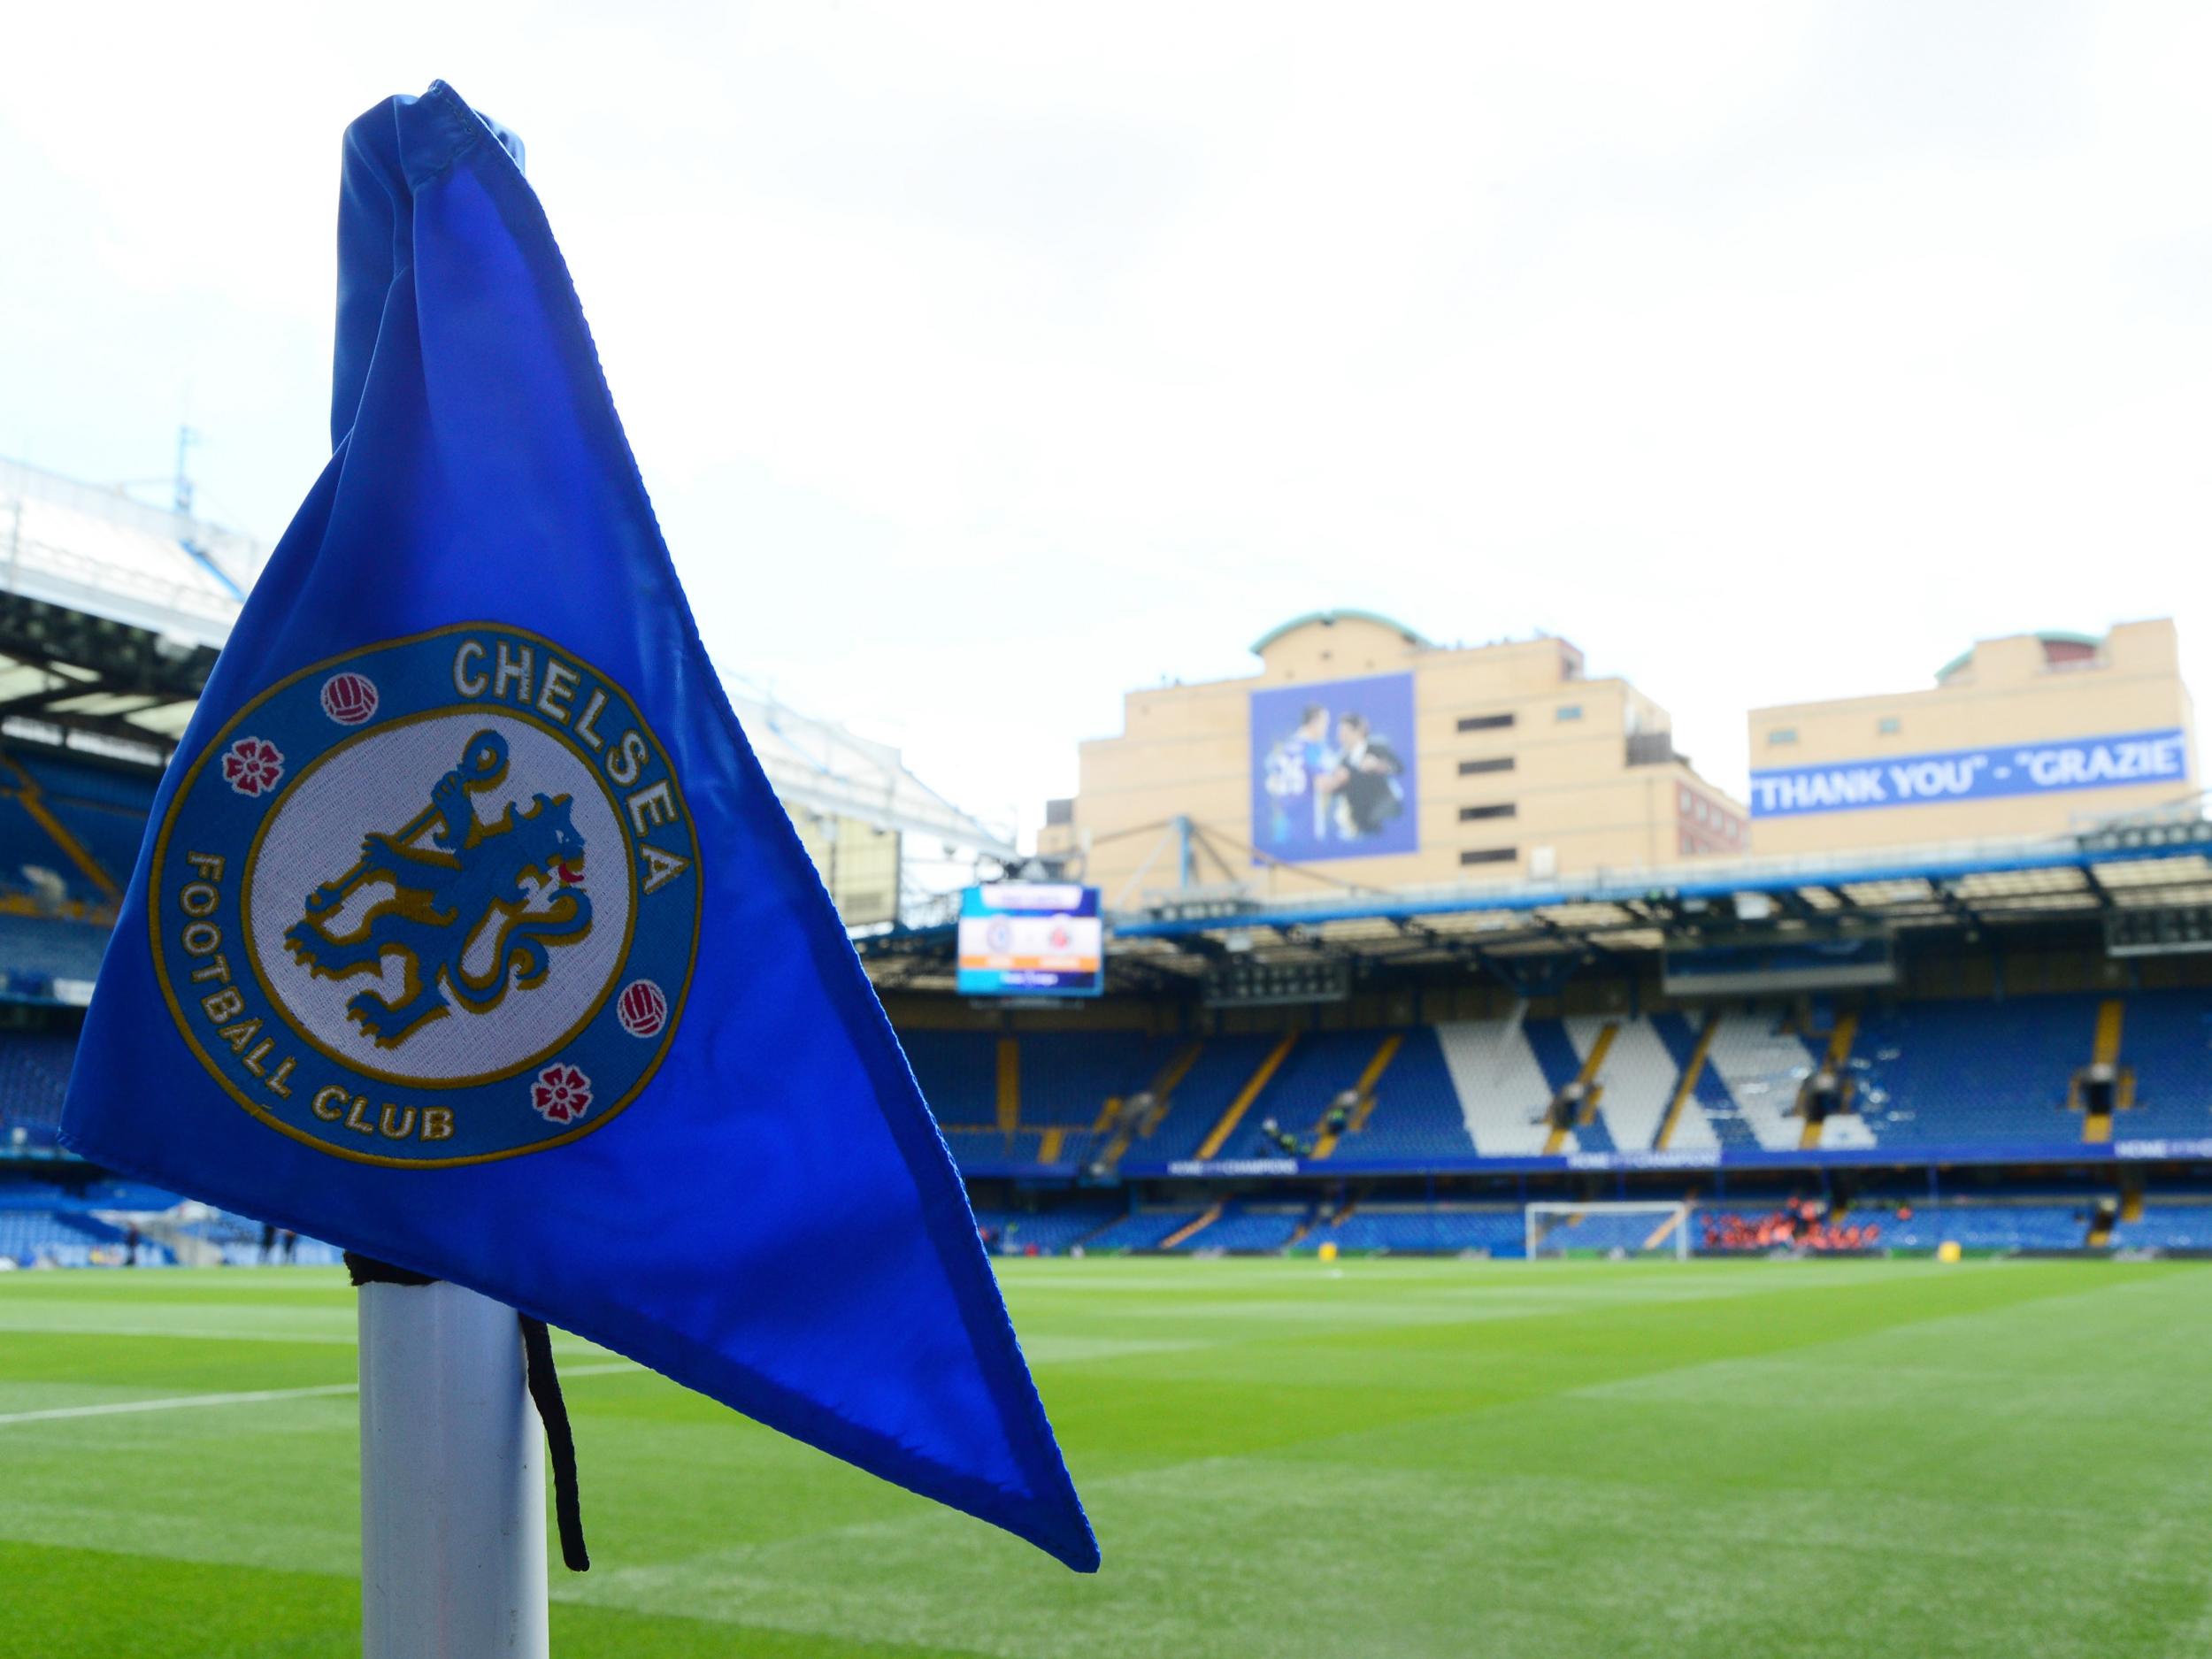 Chelsea have denied any wrongdoing